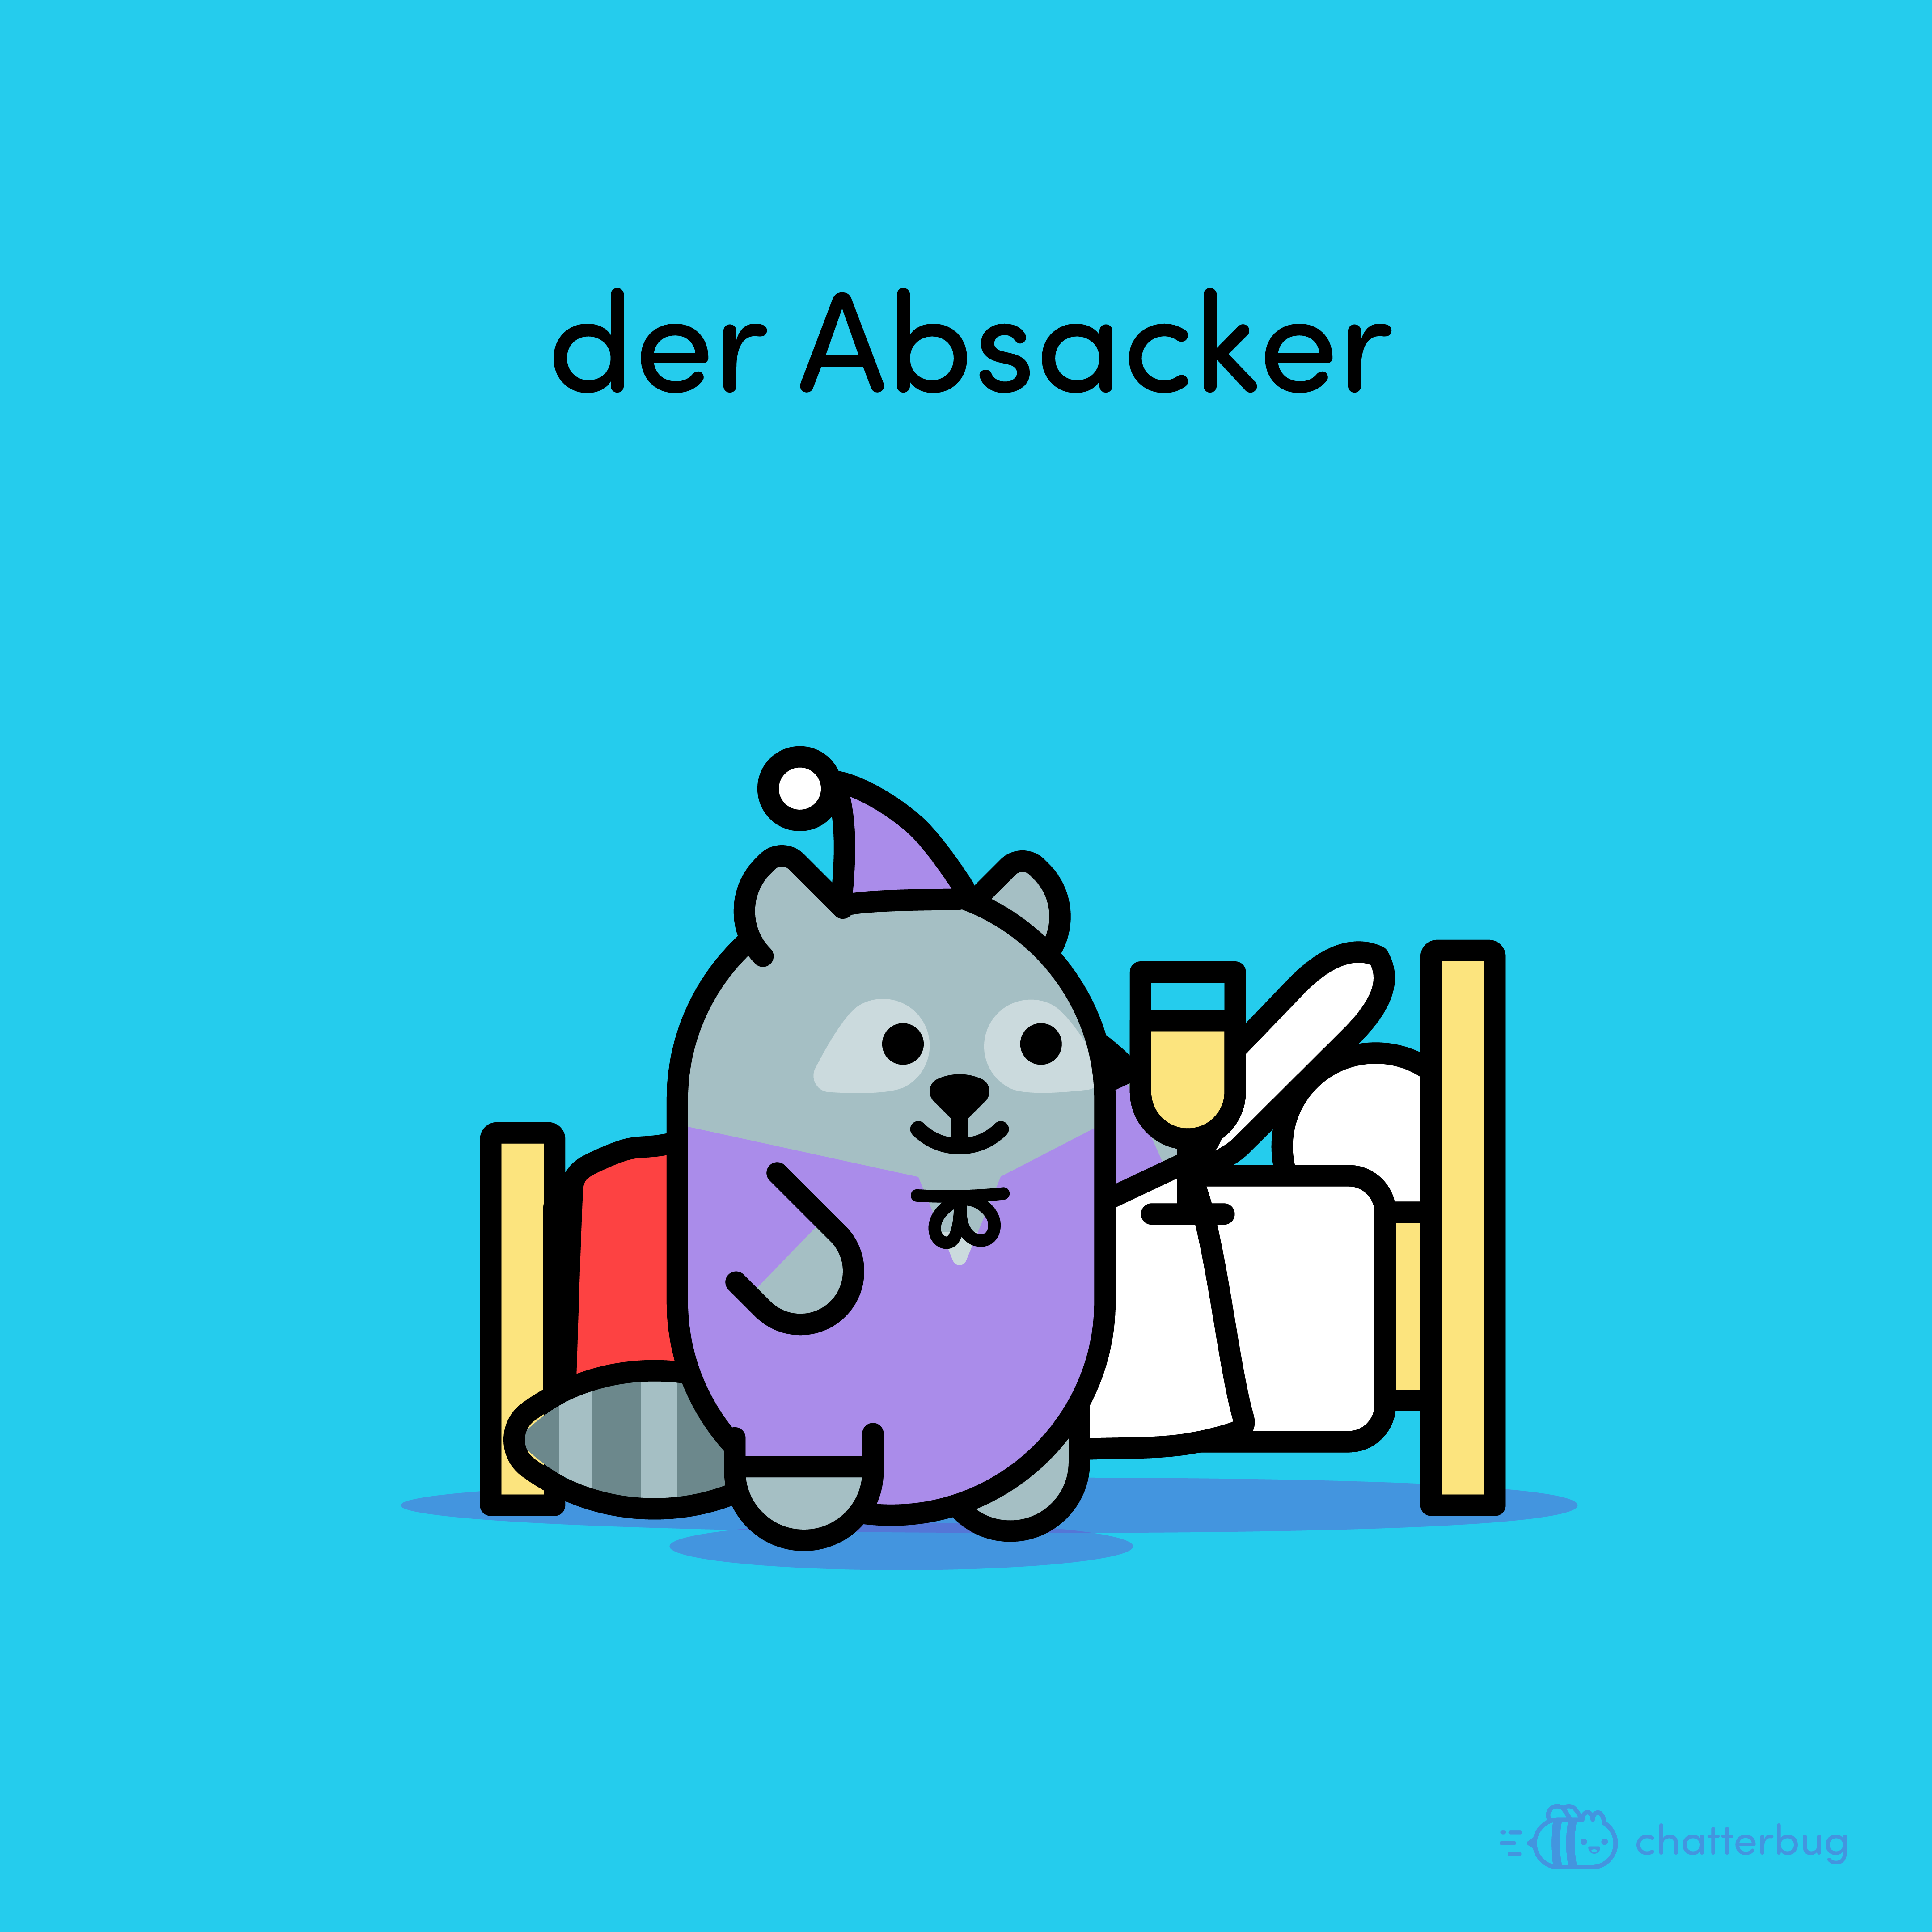 15 Funny (and Sometimes Quite Logical) German Words - Chatterblog